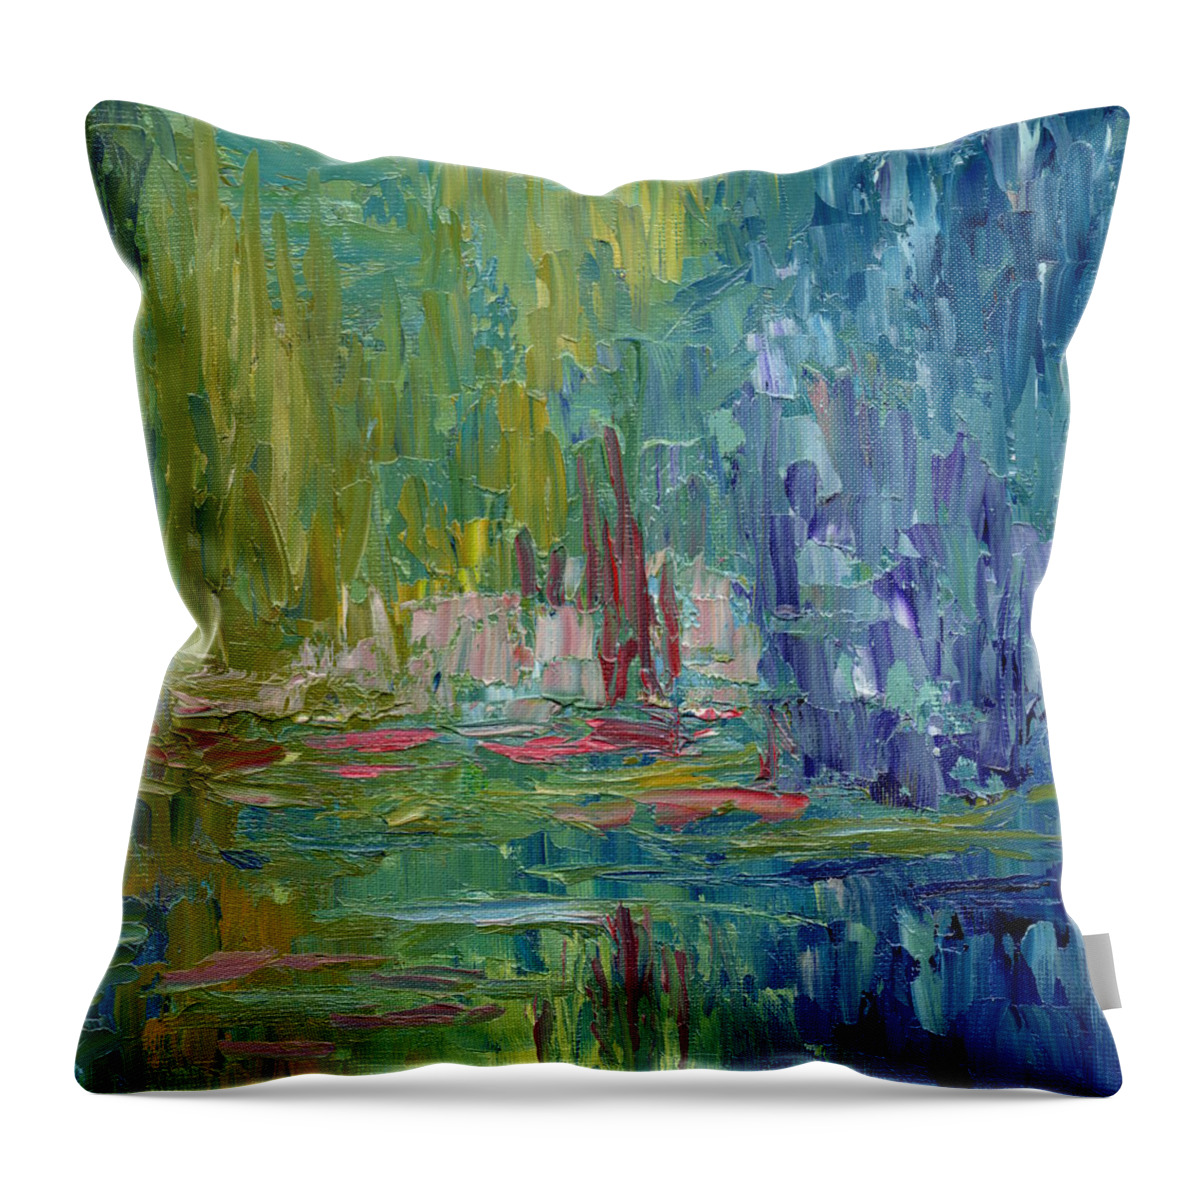 Abstract Garden Throw Pillow featuring the painting Monet's Garden by Marcy Brennan